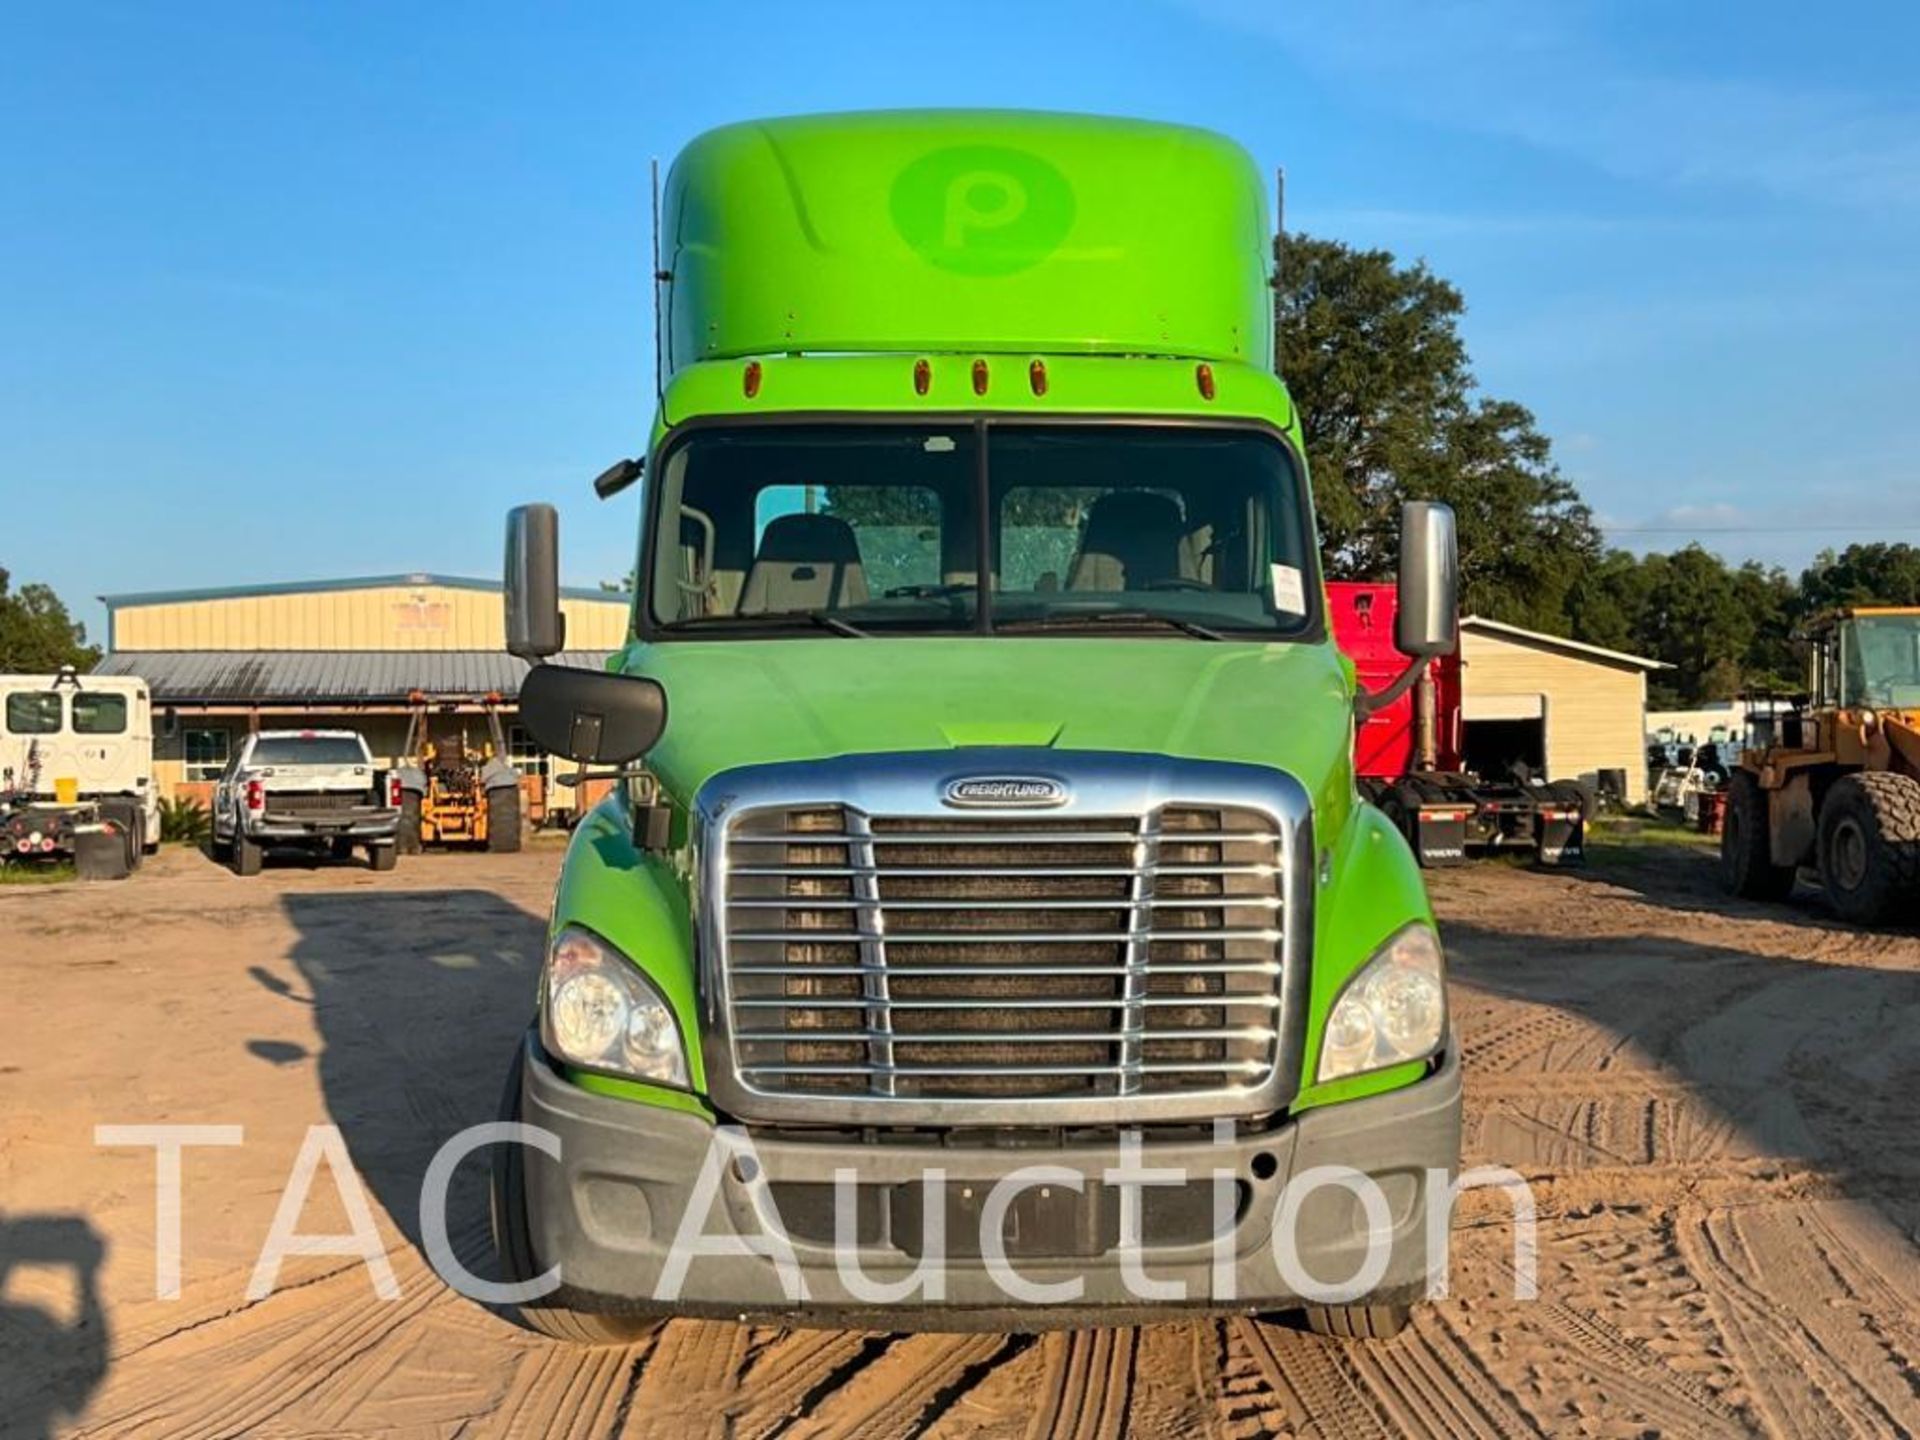 2017 Freightliner Cascadia Day Cab - Image 18 of 114